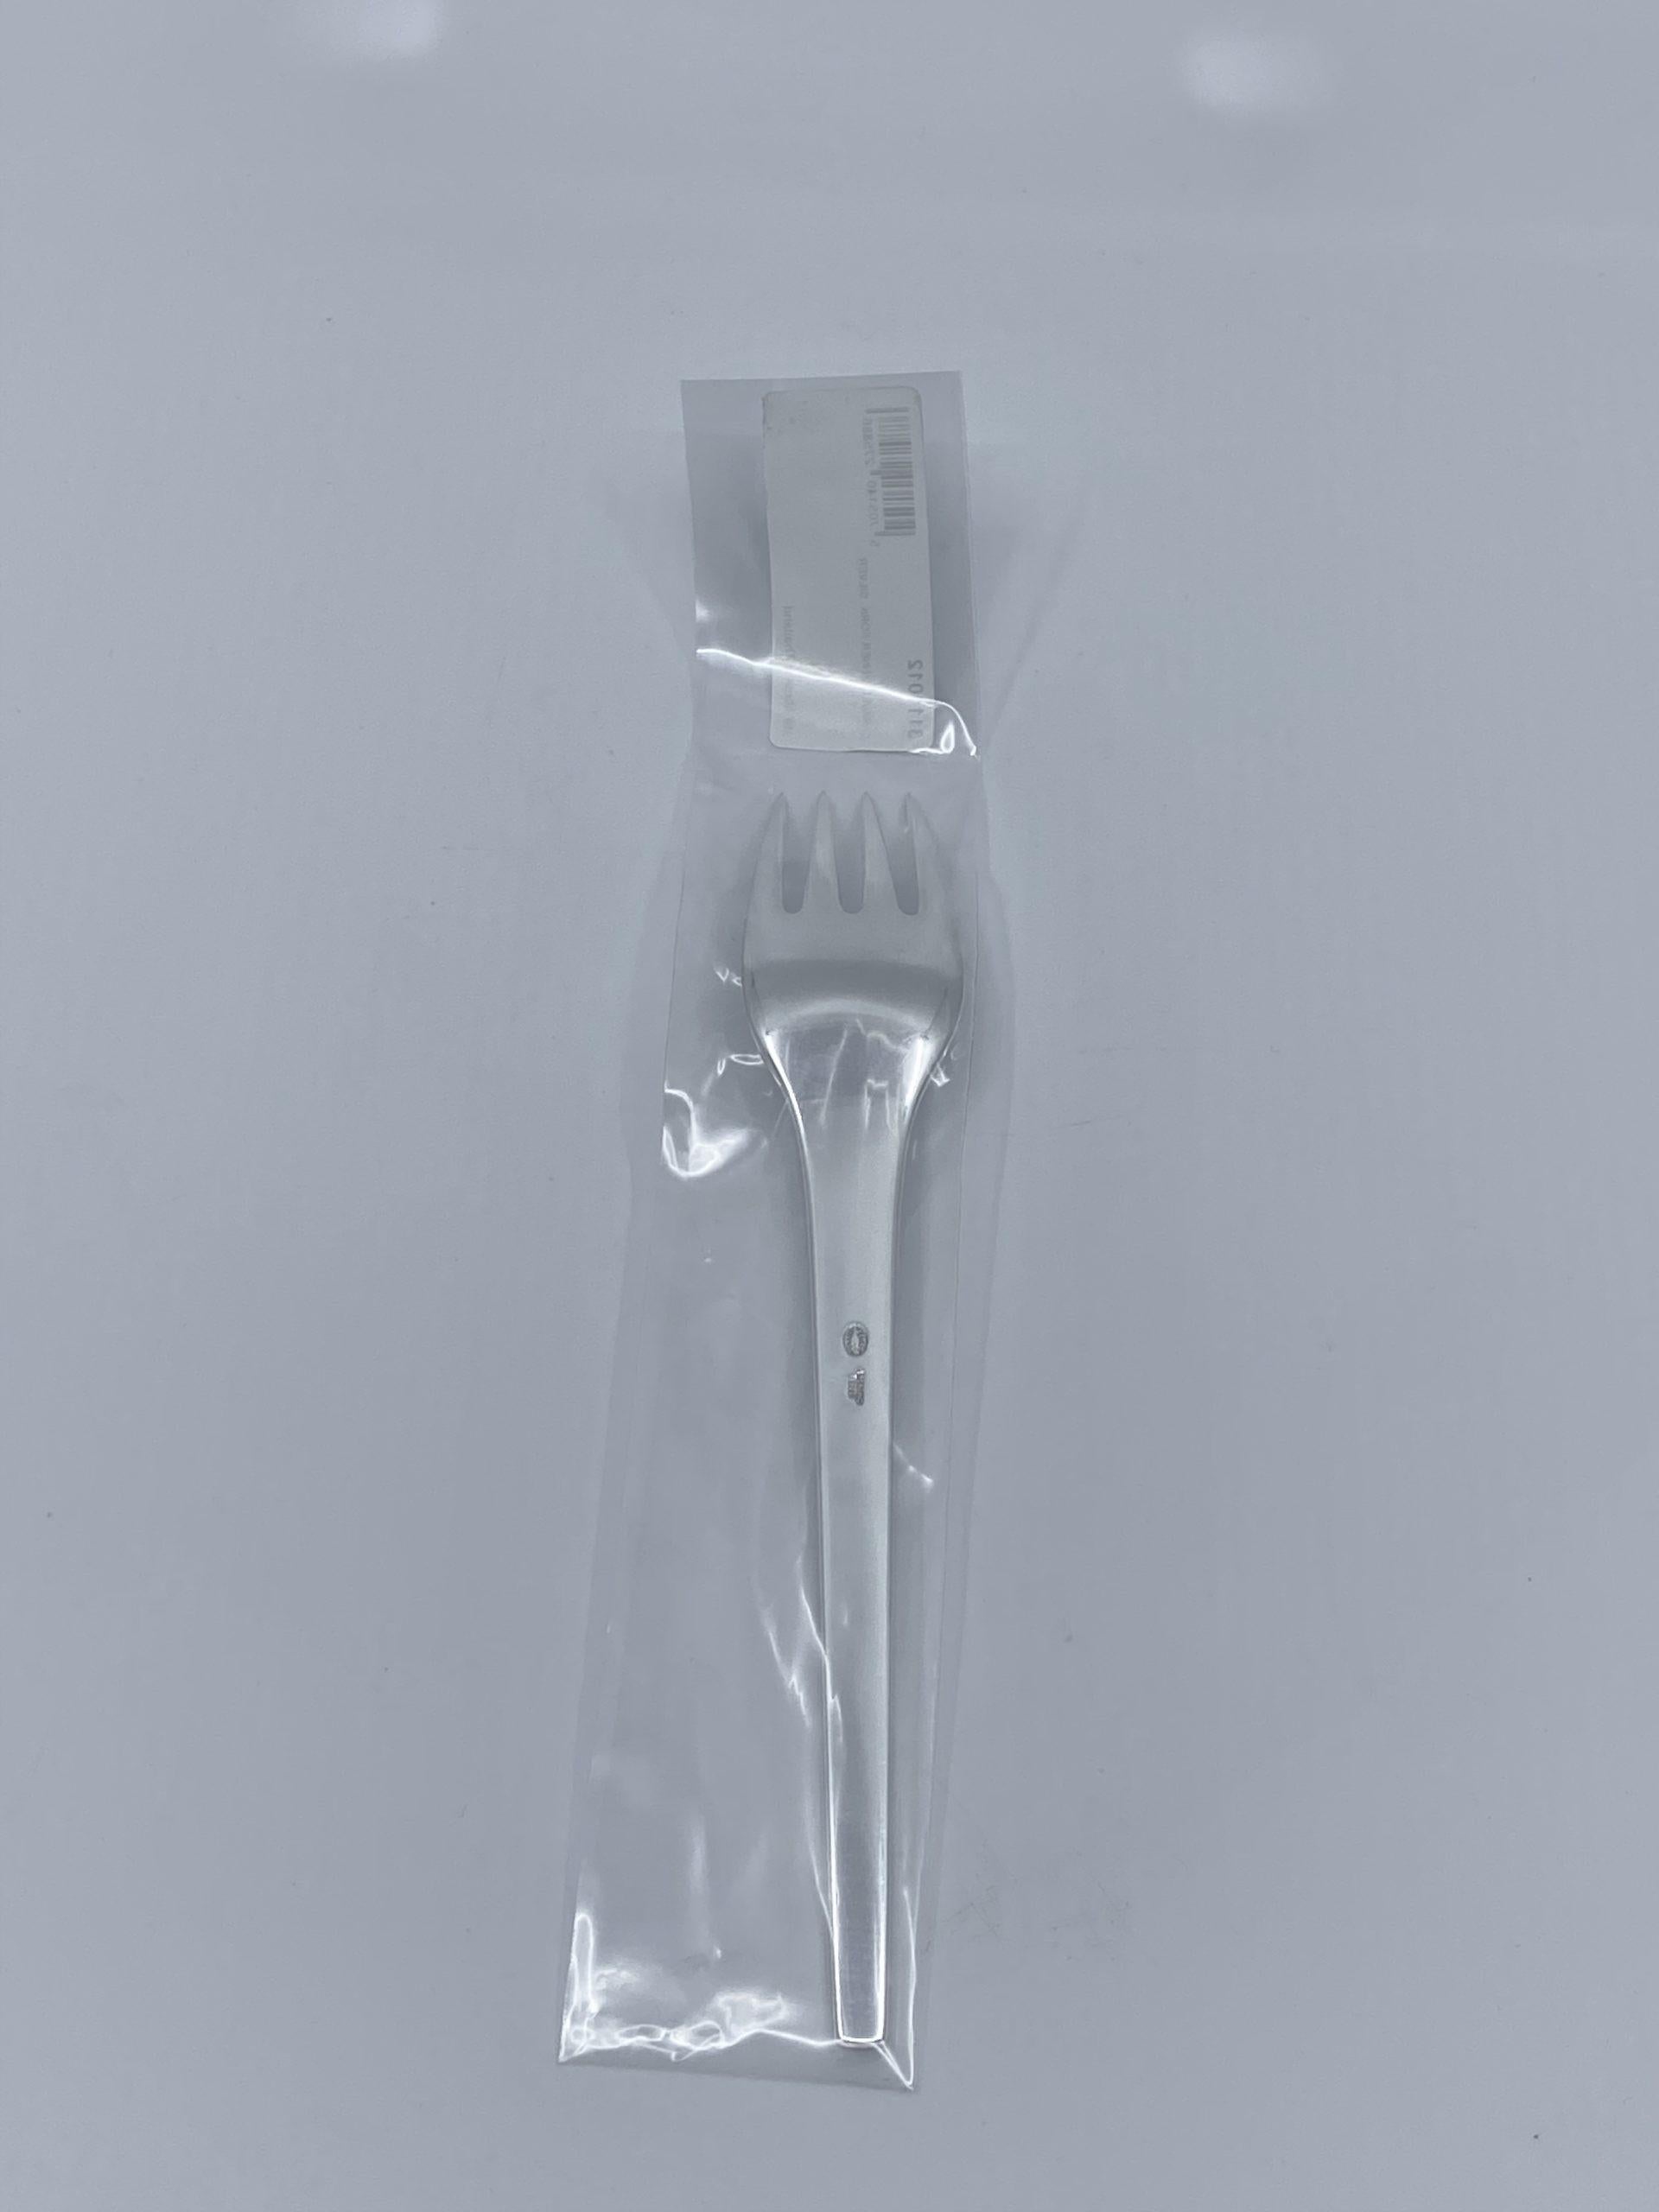 Sterling silver Georg Jensen dinner fork, item 012 in the Caravel pattern, design #111 by Henning Koppel from 1957. Still a very modern design, sleek and completely without decoration.

Additional information:
Material: Sterling silver
Styles: